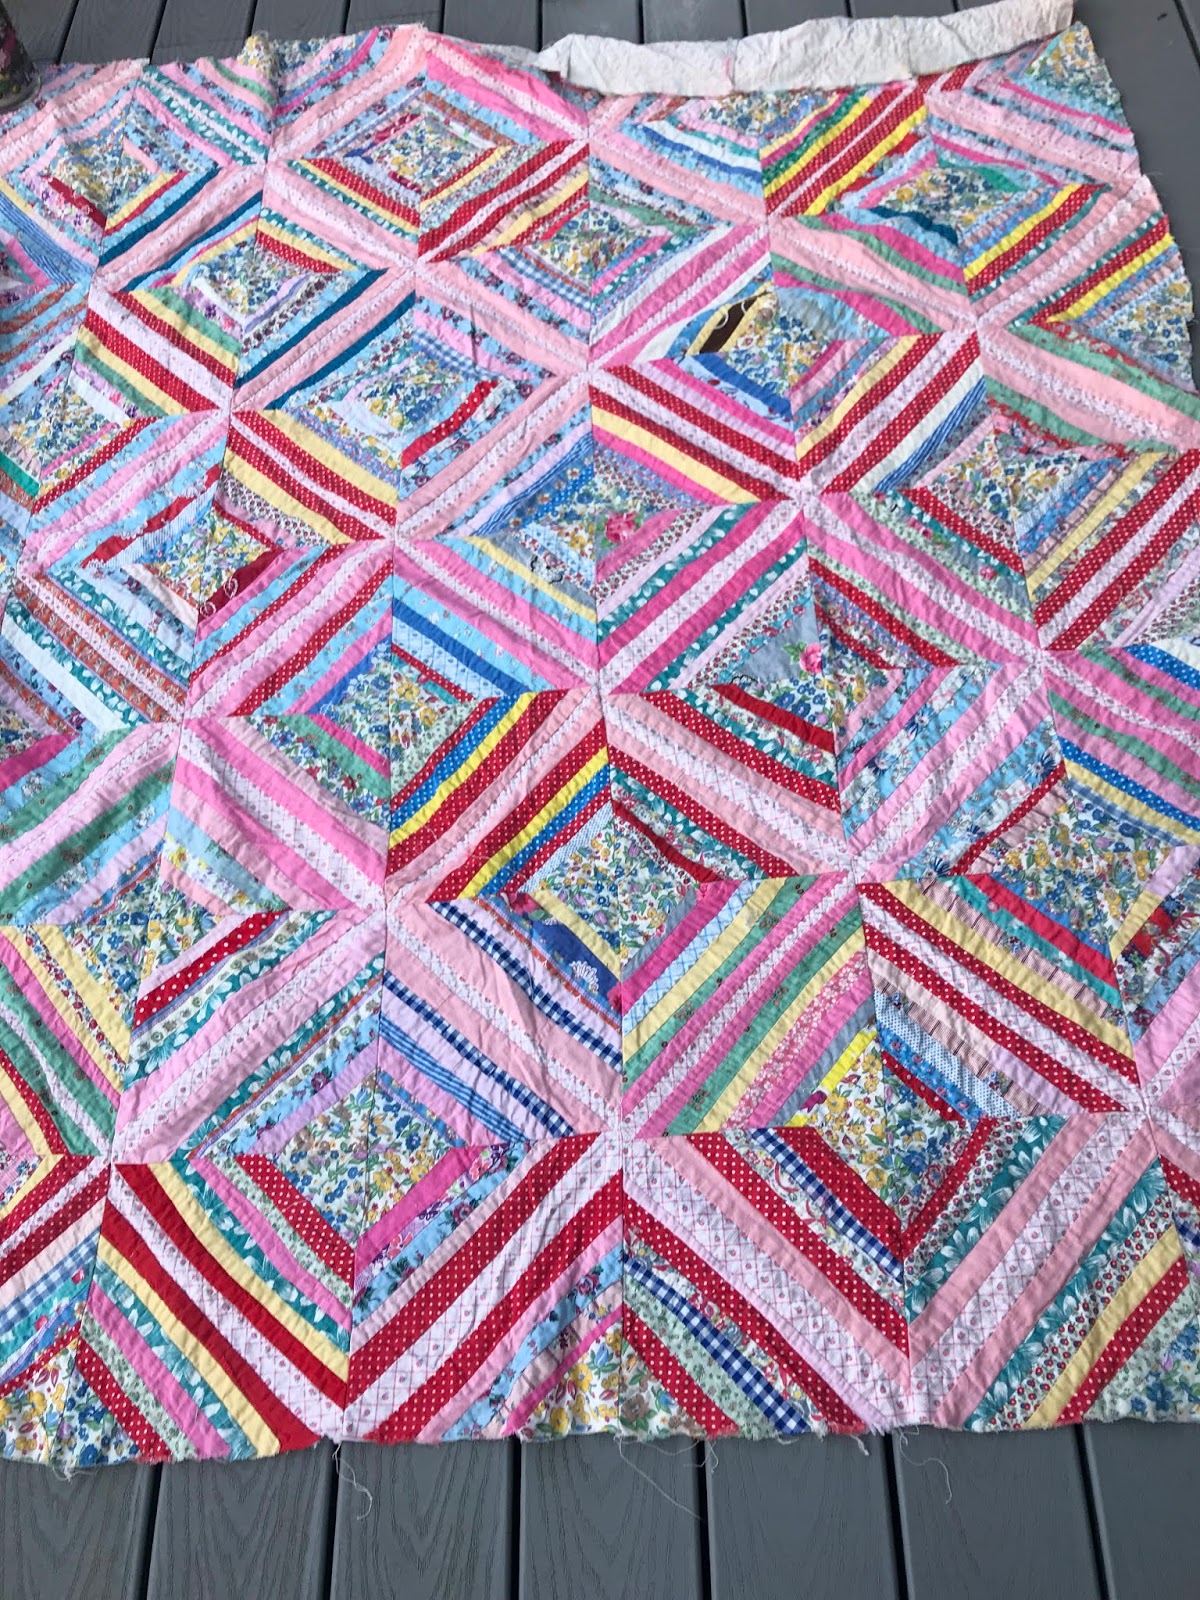 String Quilt Hand quilted